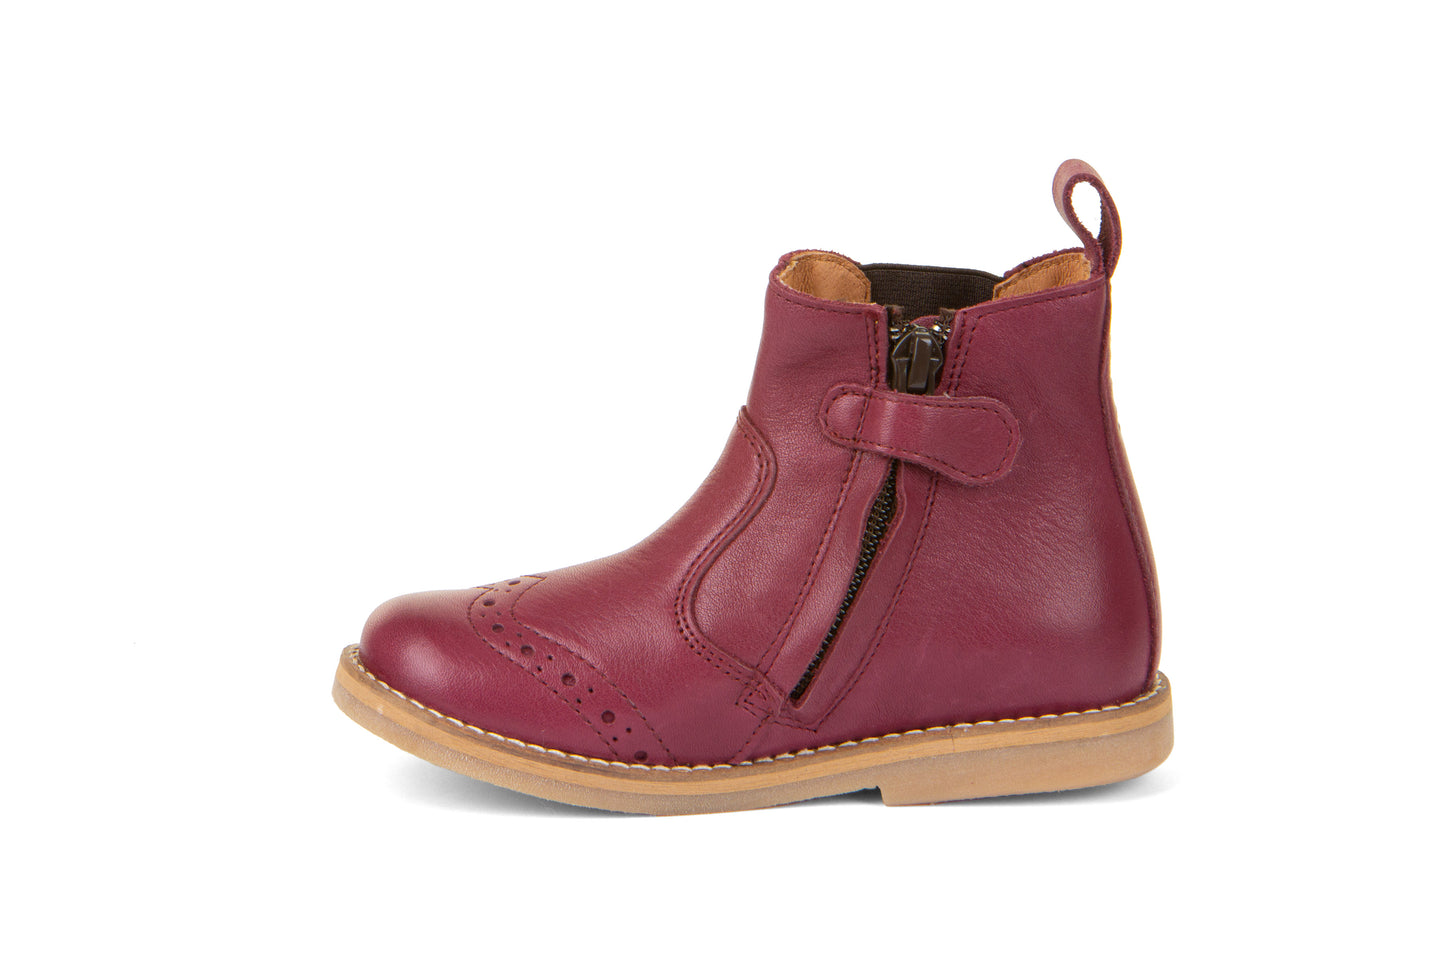 Chelys Brogue Chelsea Boot in Bordeaux Leather